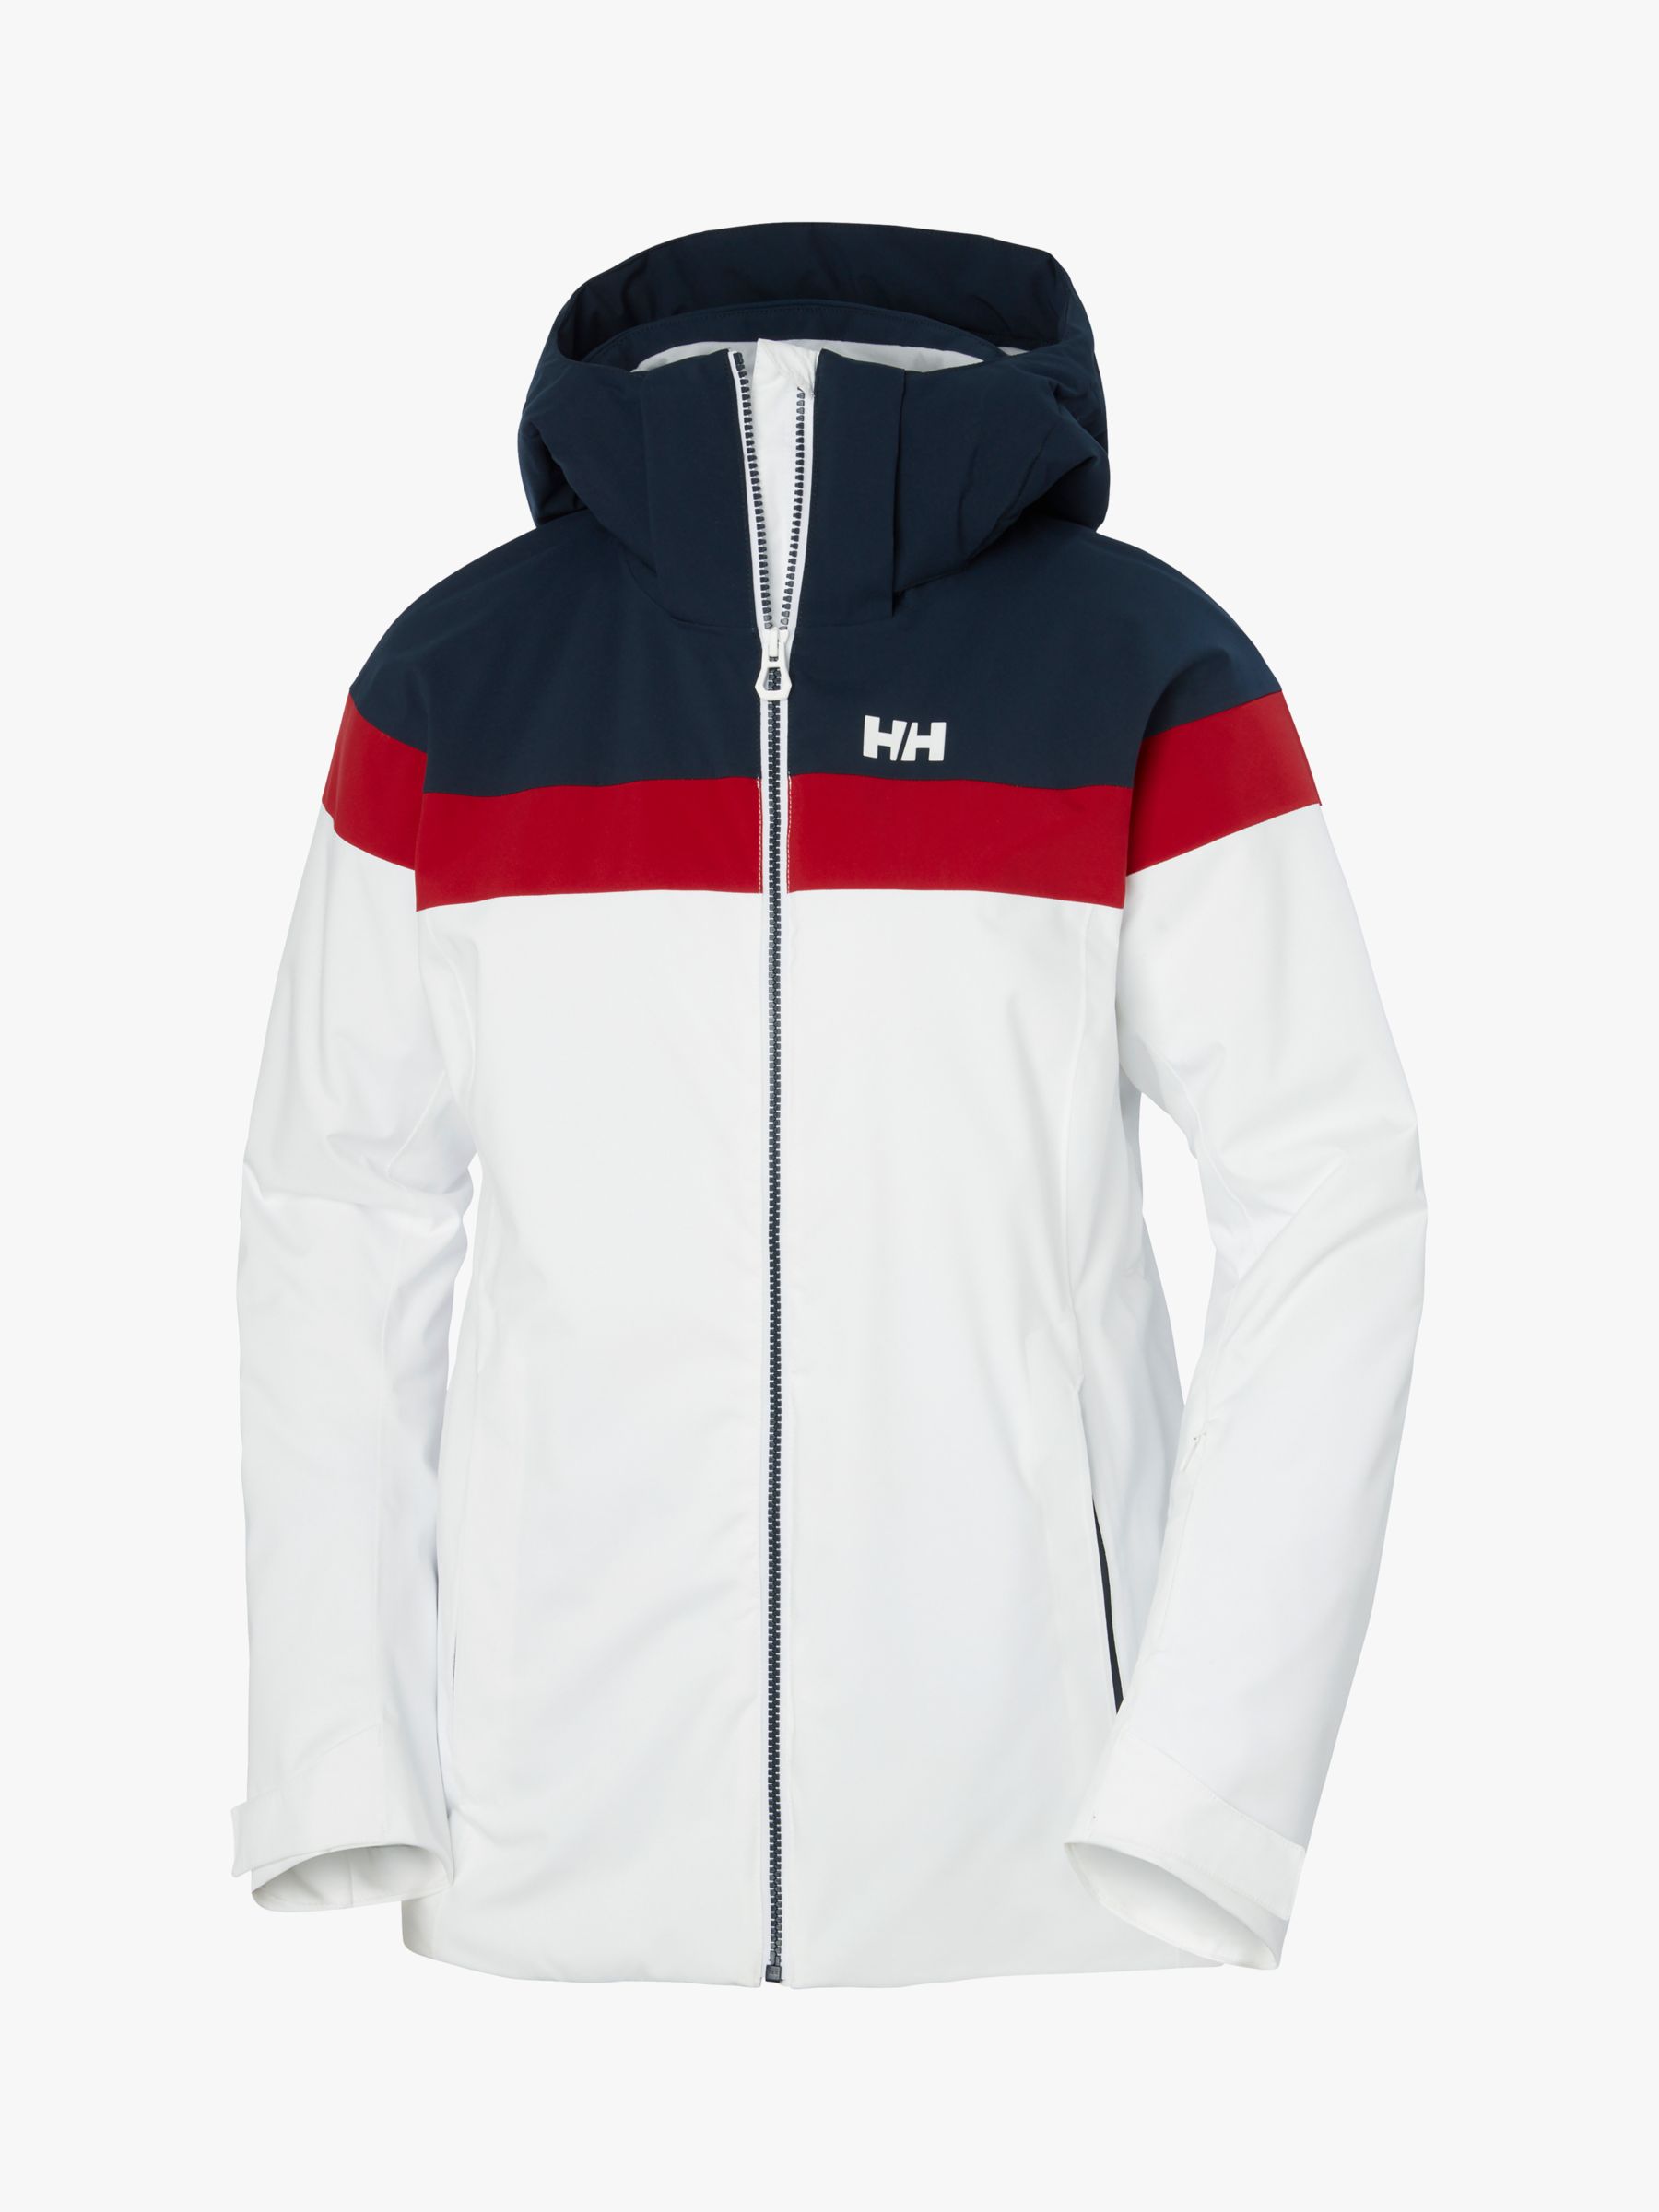 Helly Hansen Clothing - Red Sky Clothing and Footwear